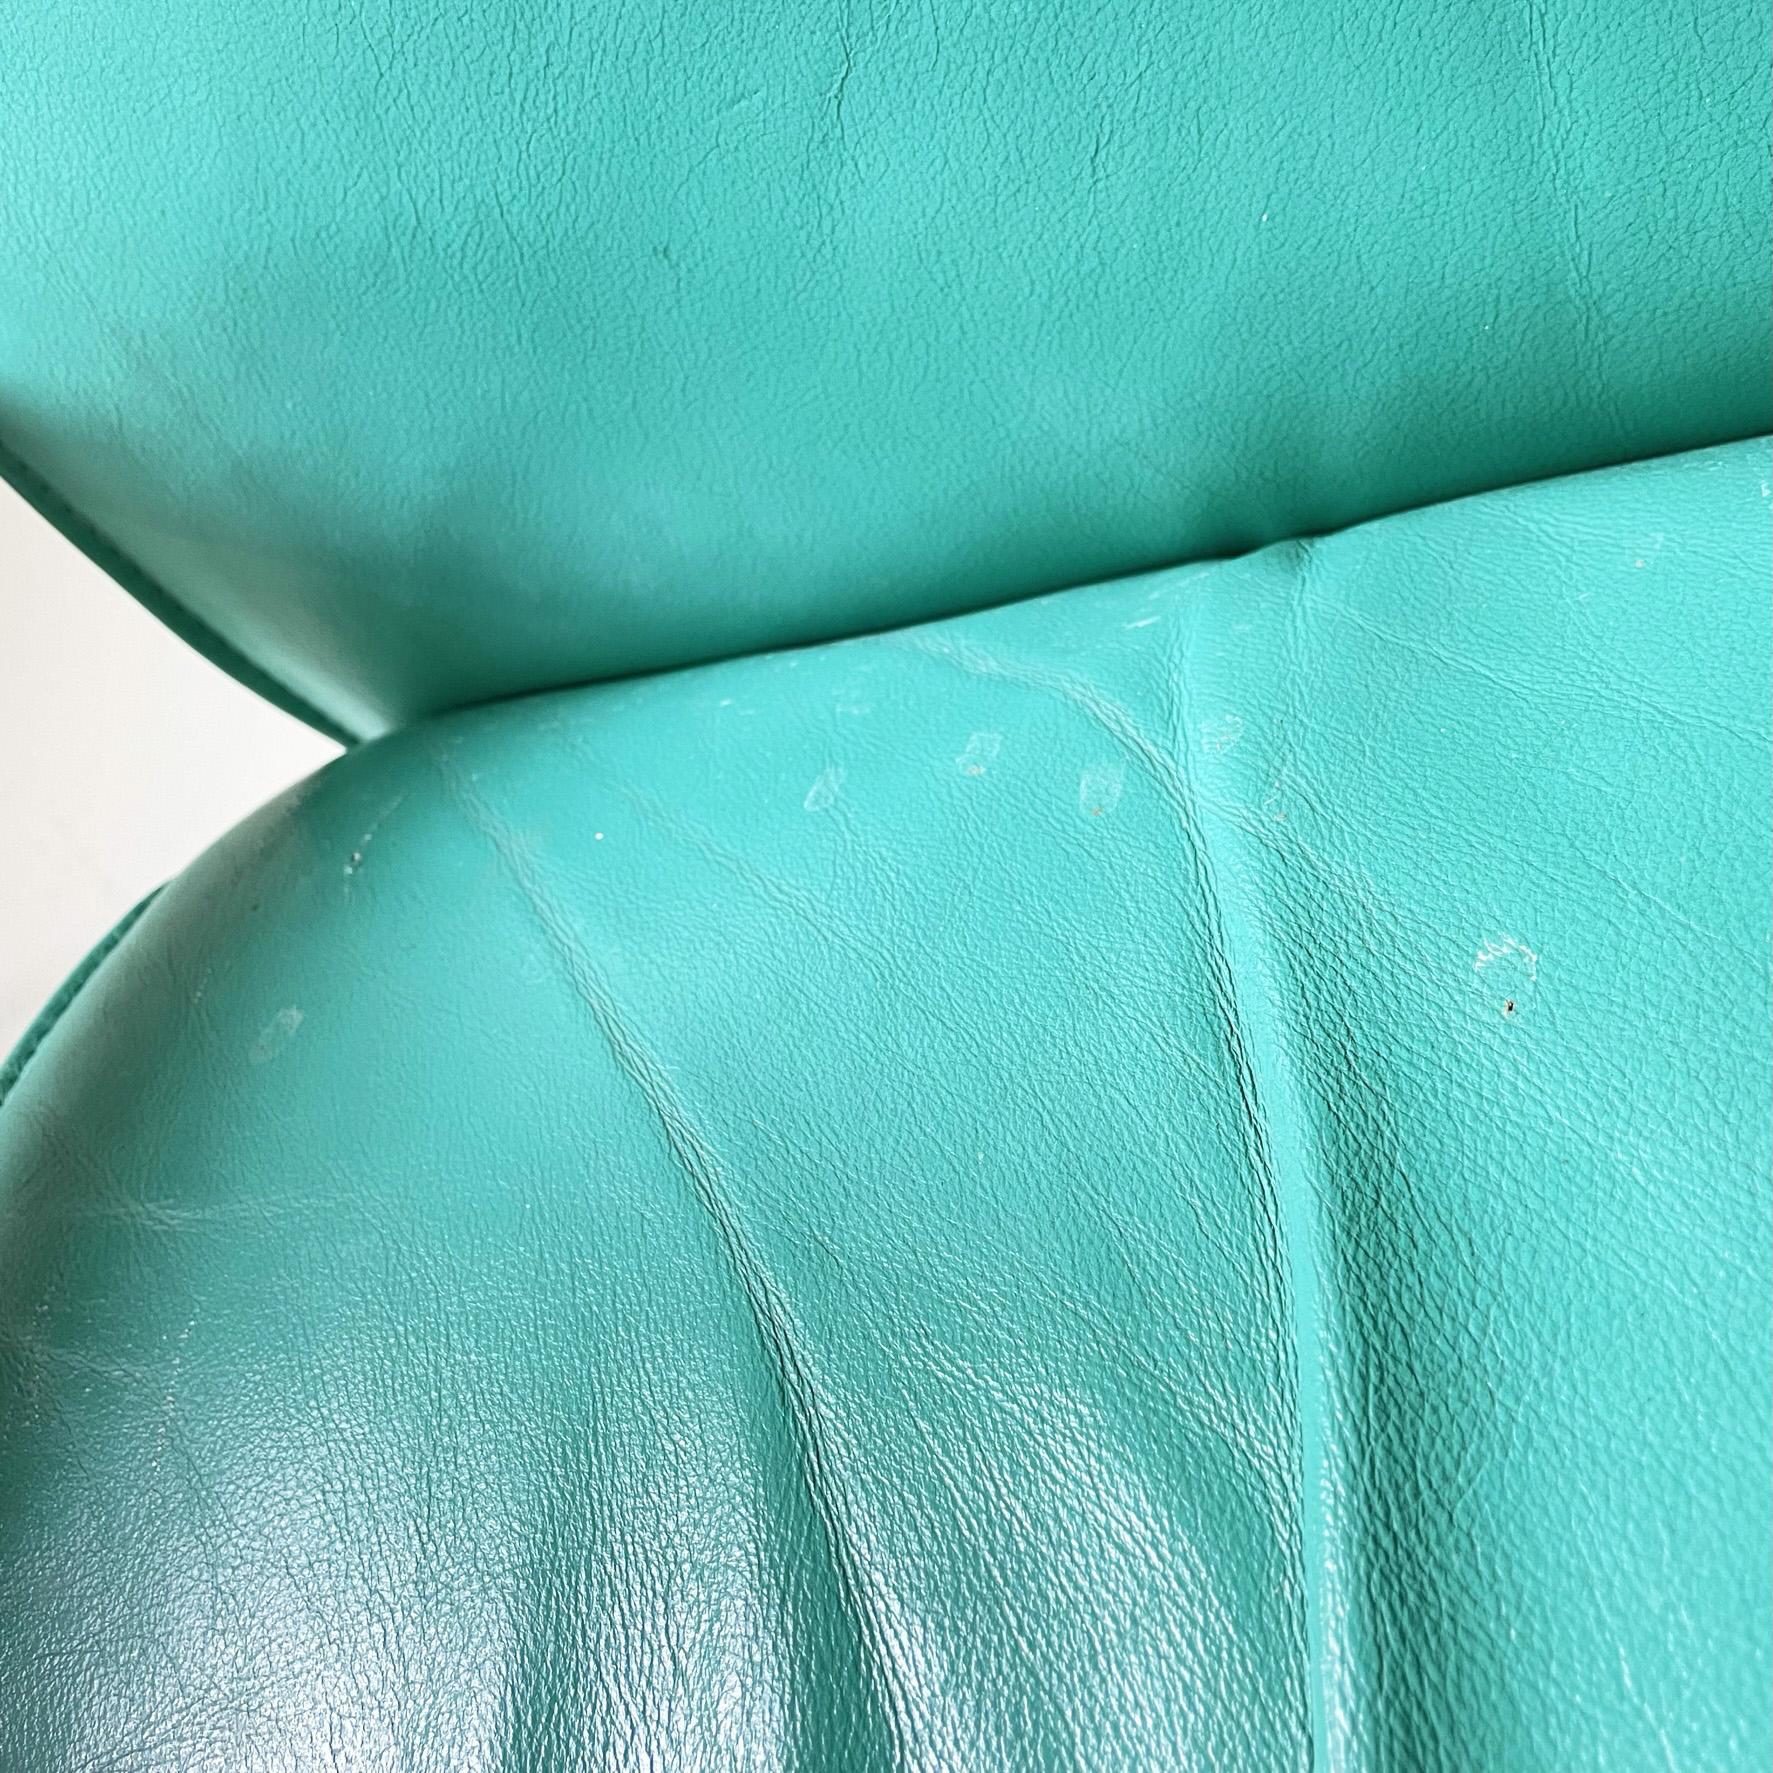 Italian Modern Armchair in Aqua-Green Leather, Wood and Metal, 1980s For Sale 6